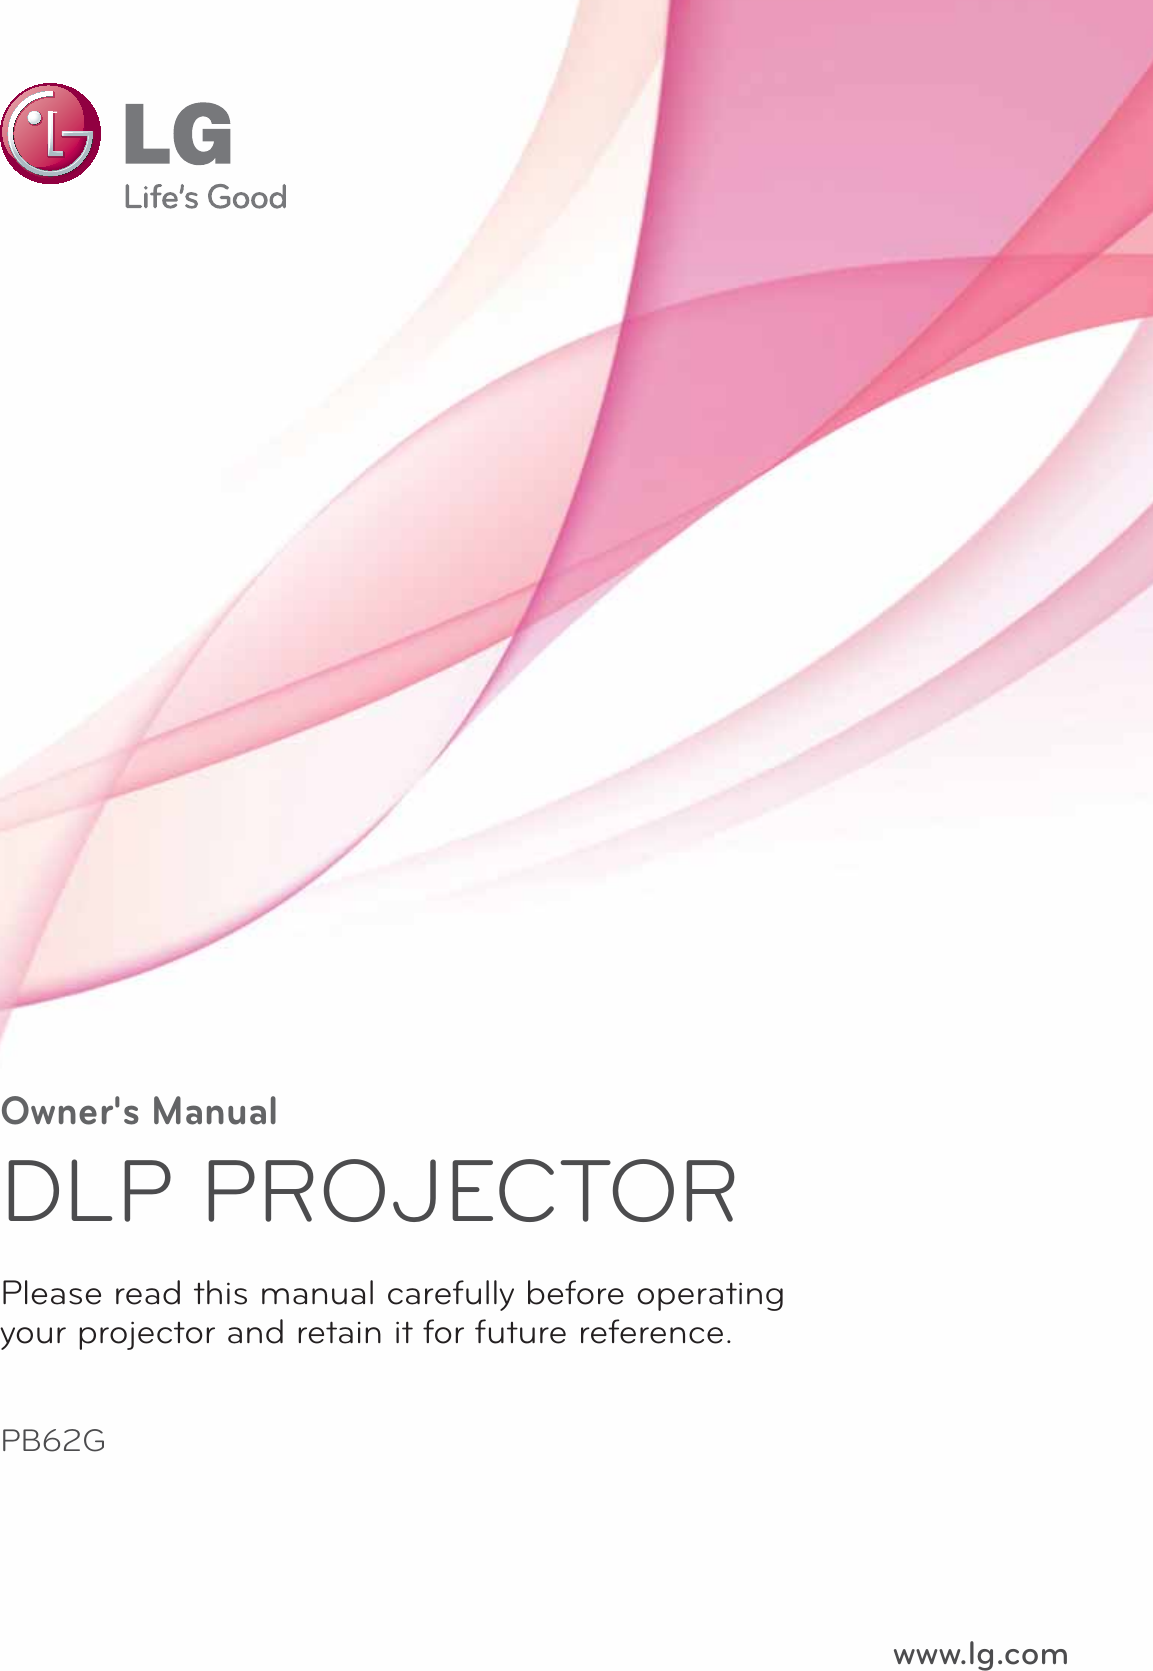 Owner&apos;s ManualDLP PROJECTORPB62GPlease read this manual carefully before operatingyour projector and retain it for future reference.www.lg.com